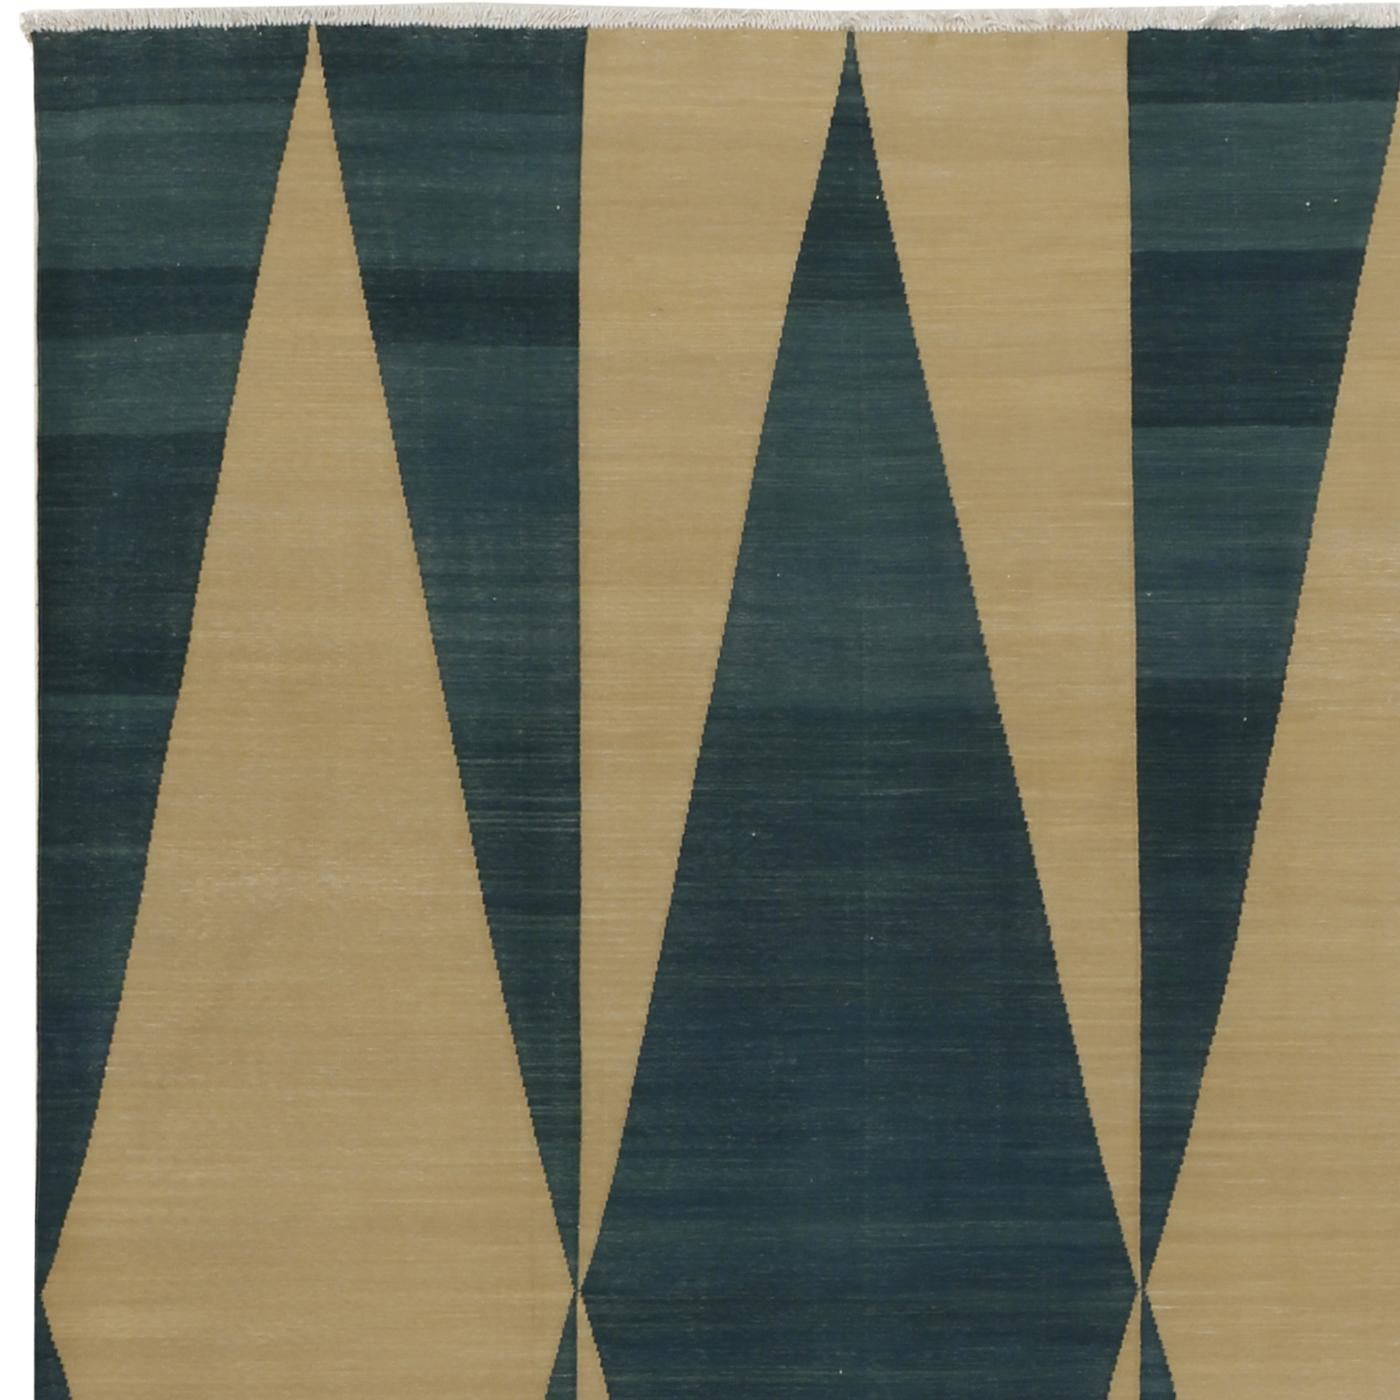 This hand-woven cotton carpet has a flat-weave and was dyed using natural pigments. Designed by Barbara Frua De Angeli exclusively for Alberto Levi Gallery, this piece features a modern decorative pattern made of three elongated diamonds in a